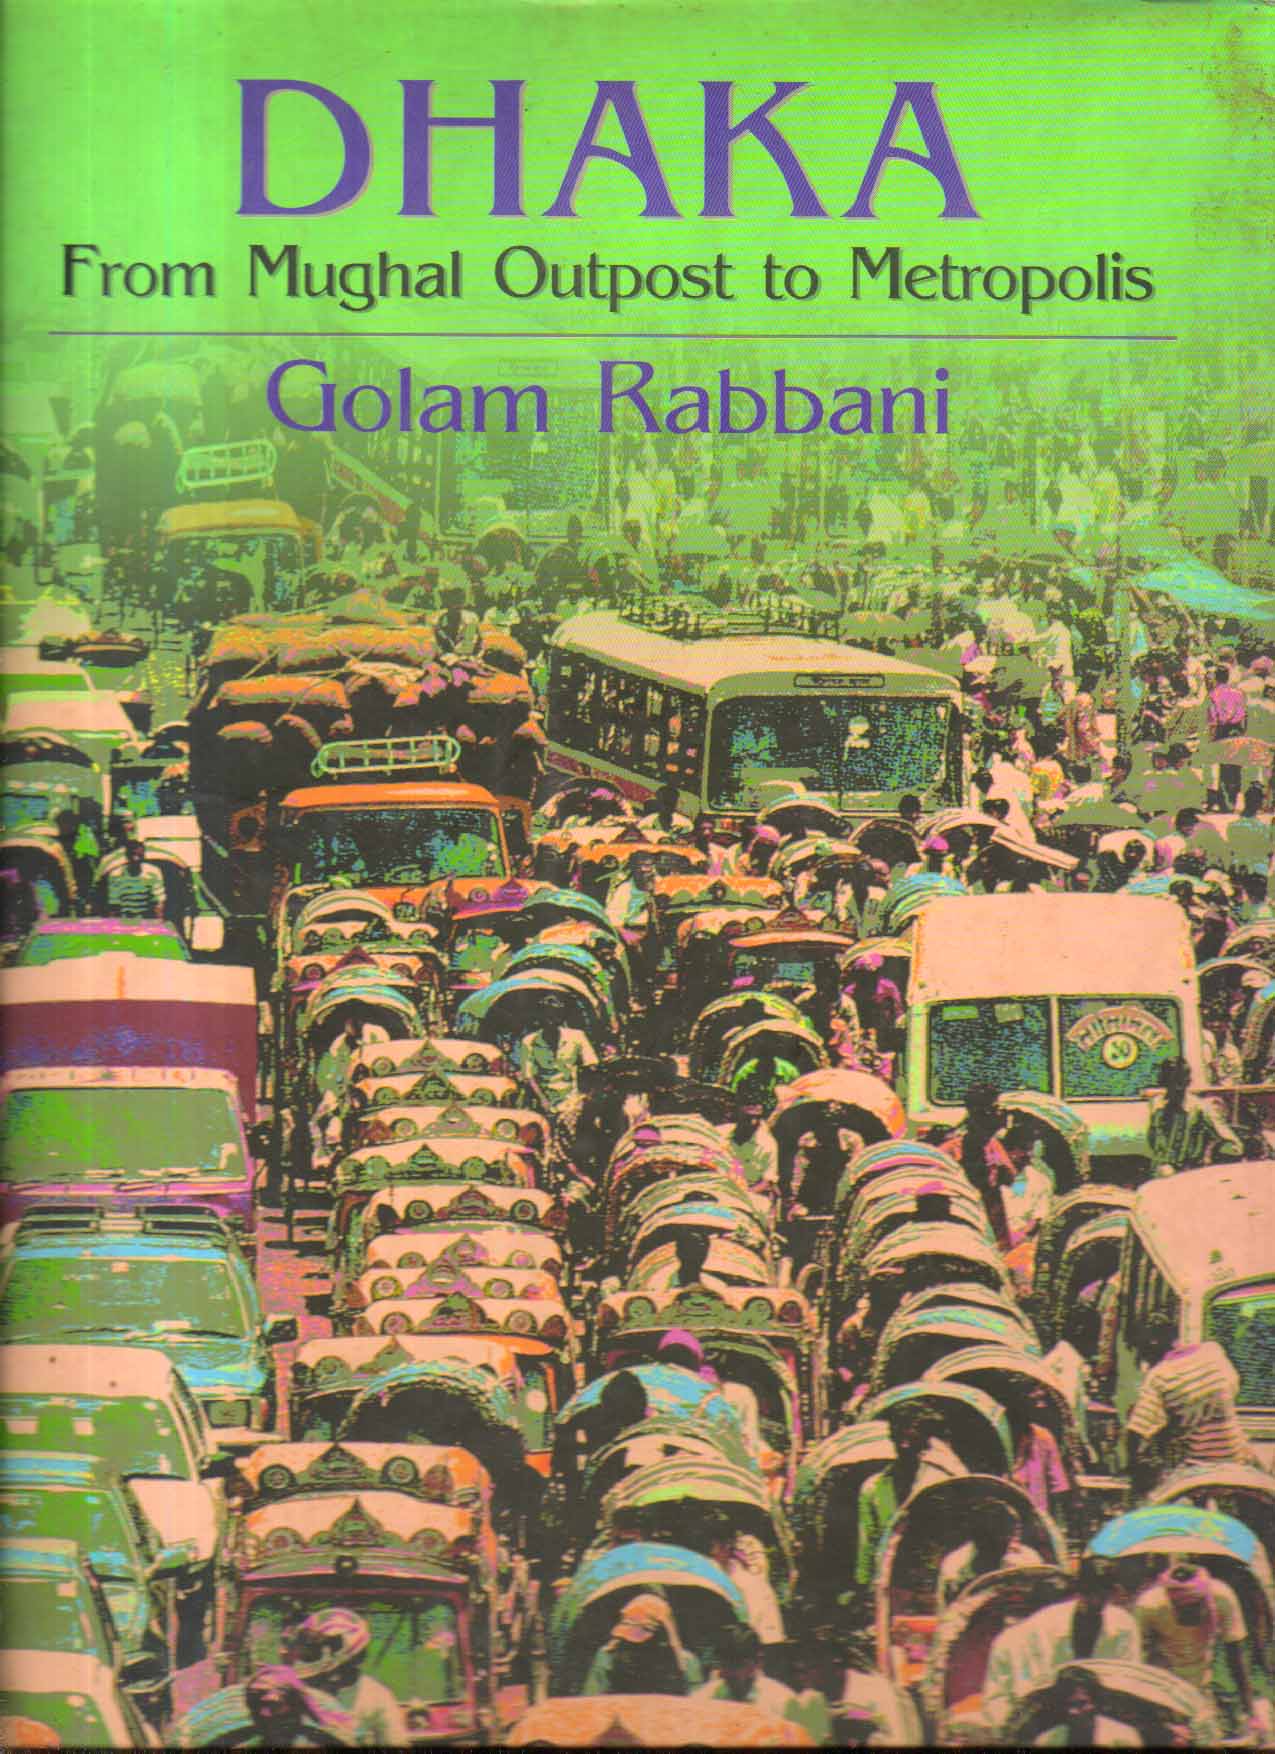 Dhaka From Mughal Outpost to Metropolis